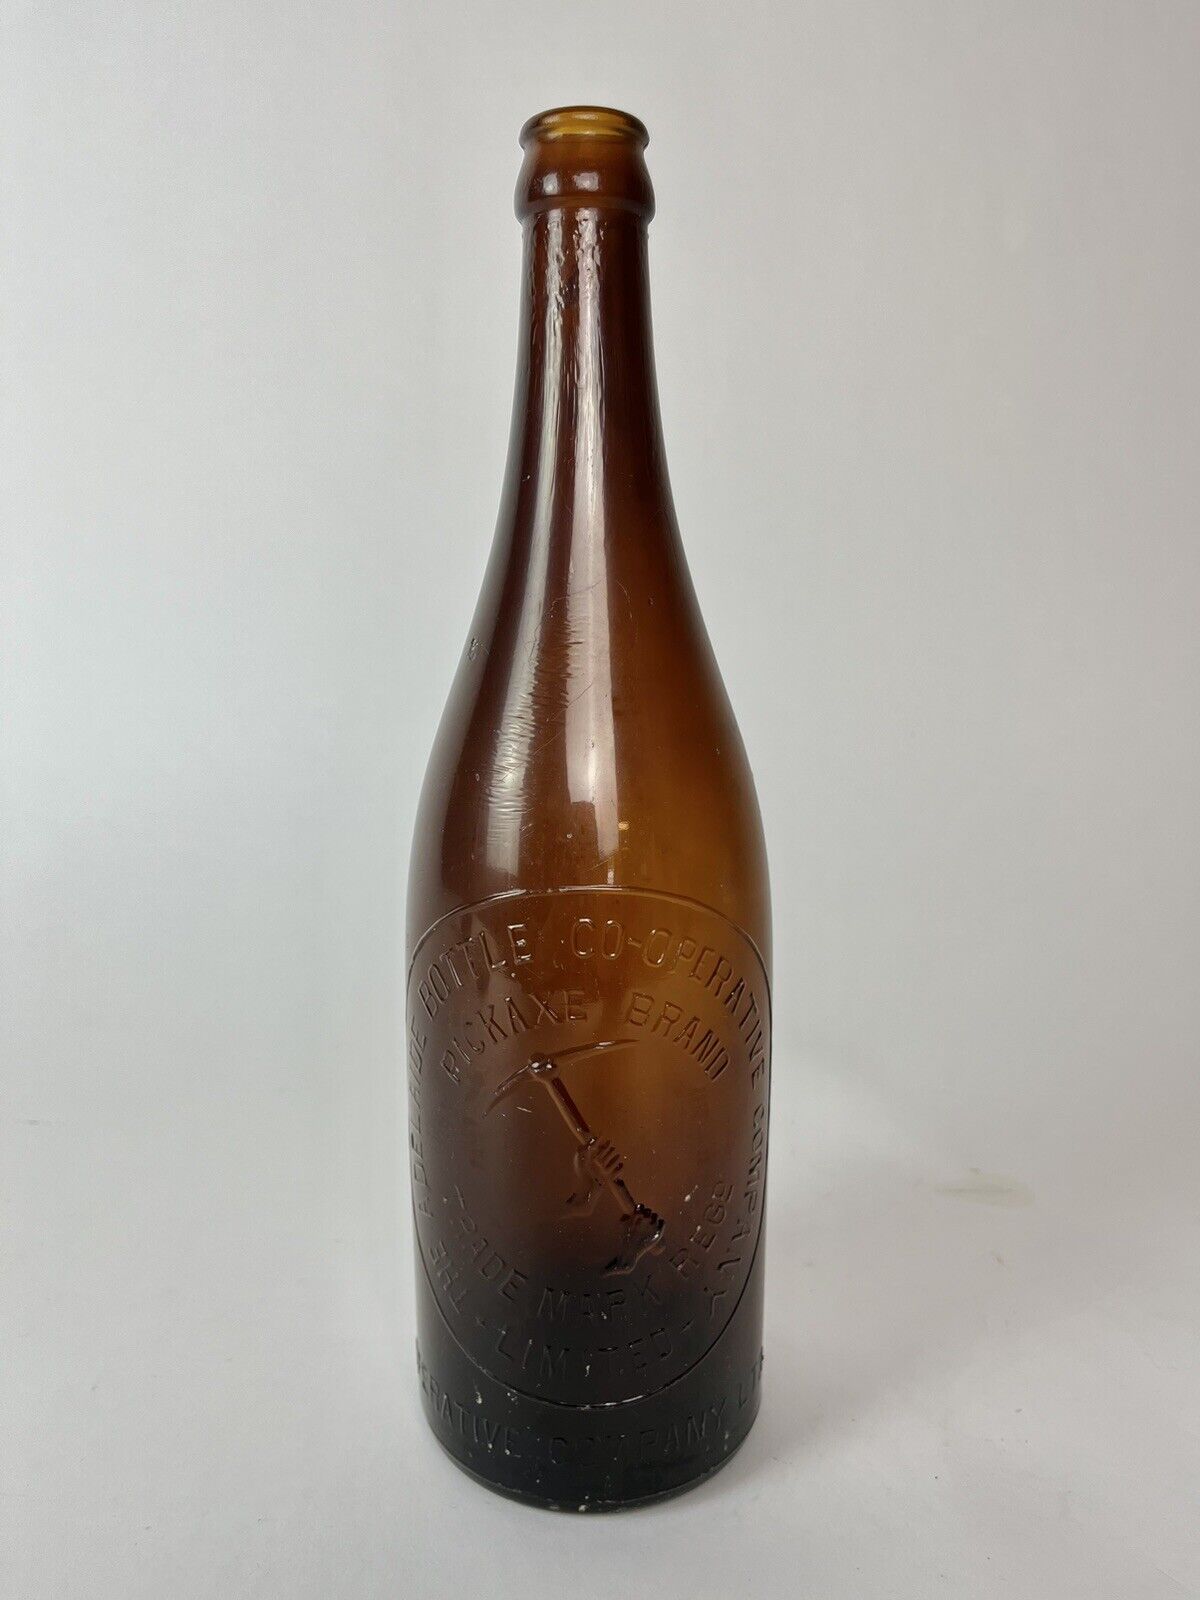 Adelaide Co-Op Company Vintage bottle Rare Brown Color from Australia 1